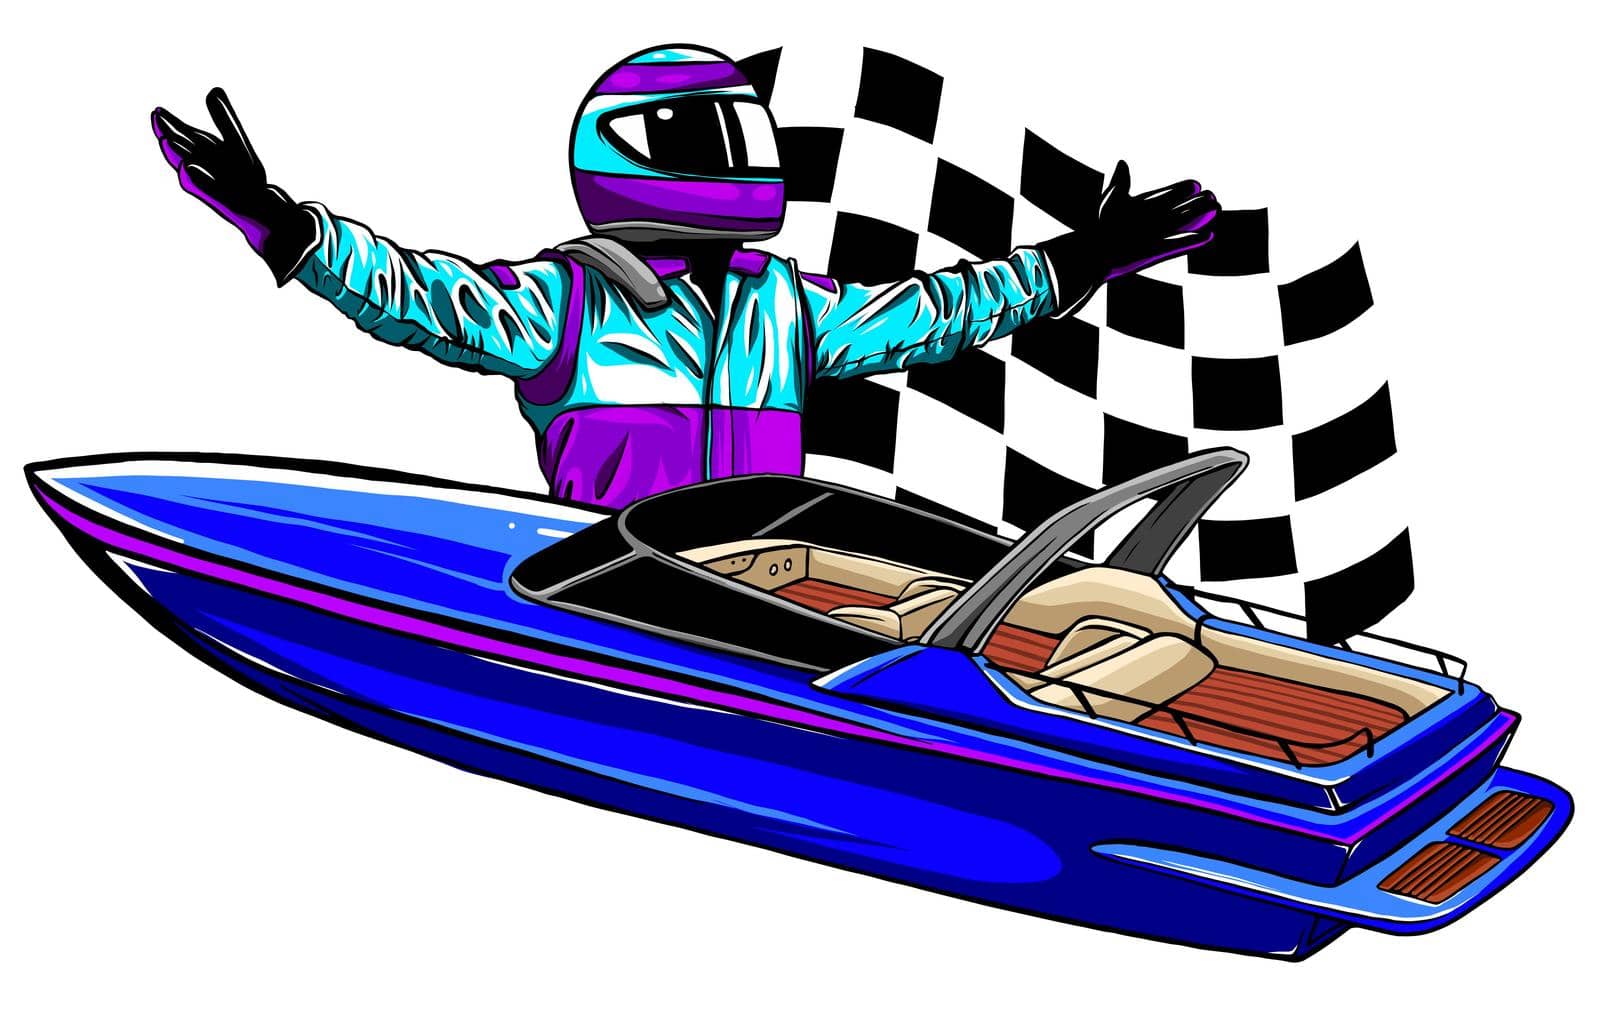 Racing boat. Top view. Vector illustration. Applique with realistic shadows.